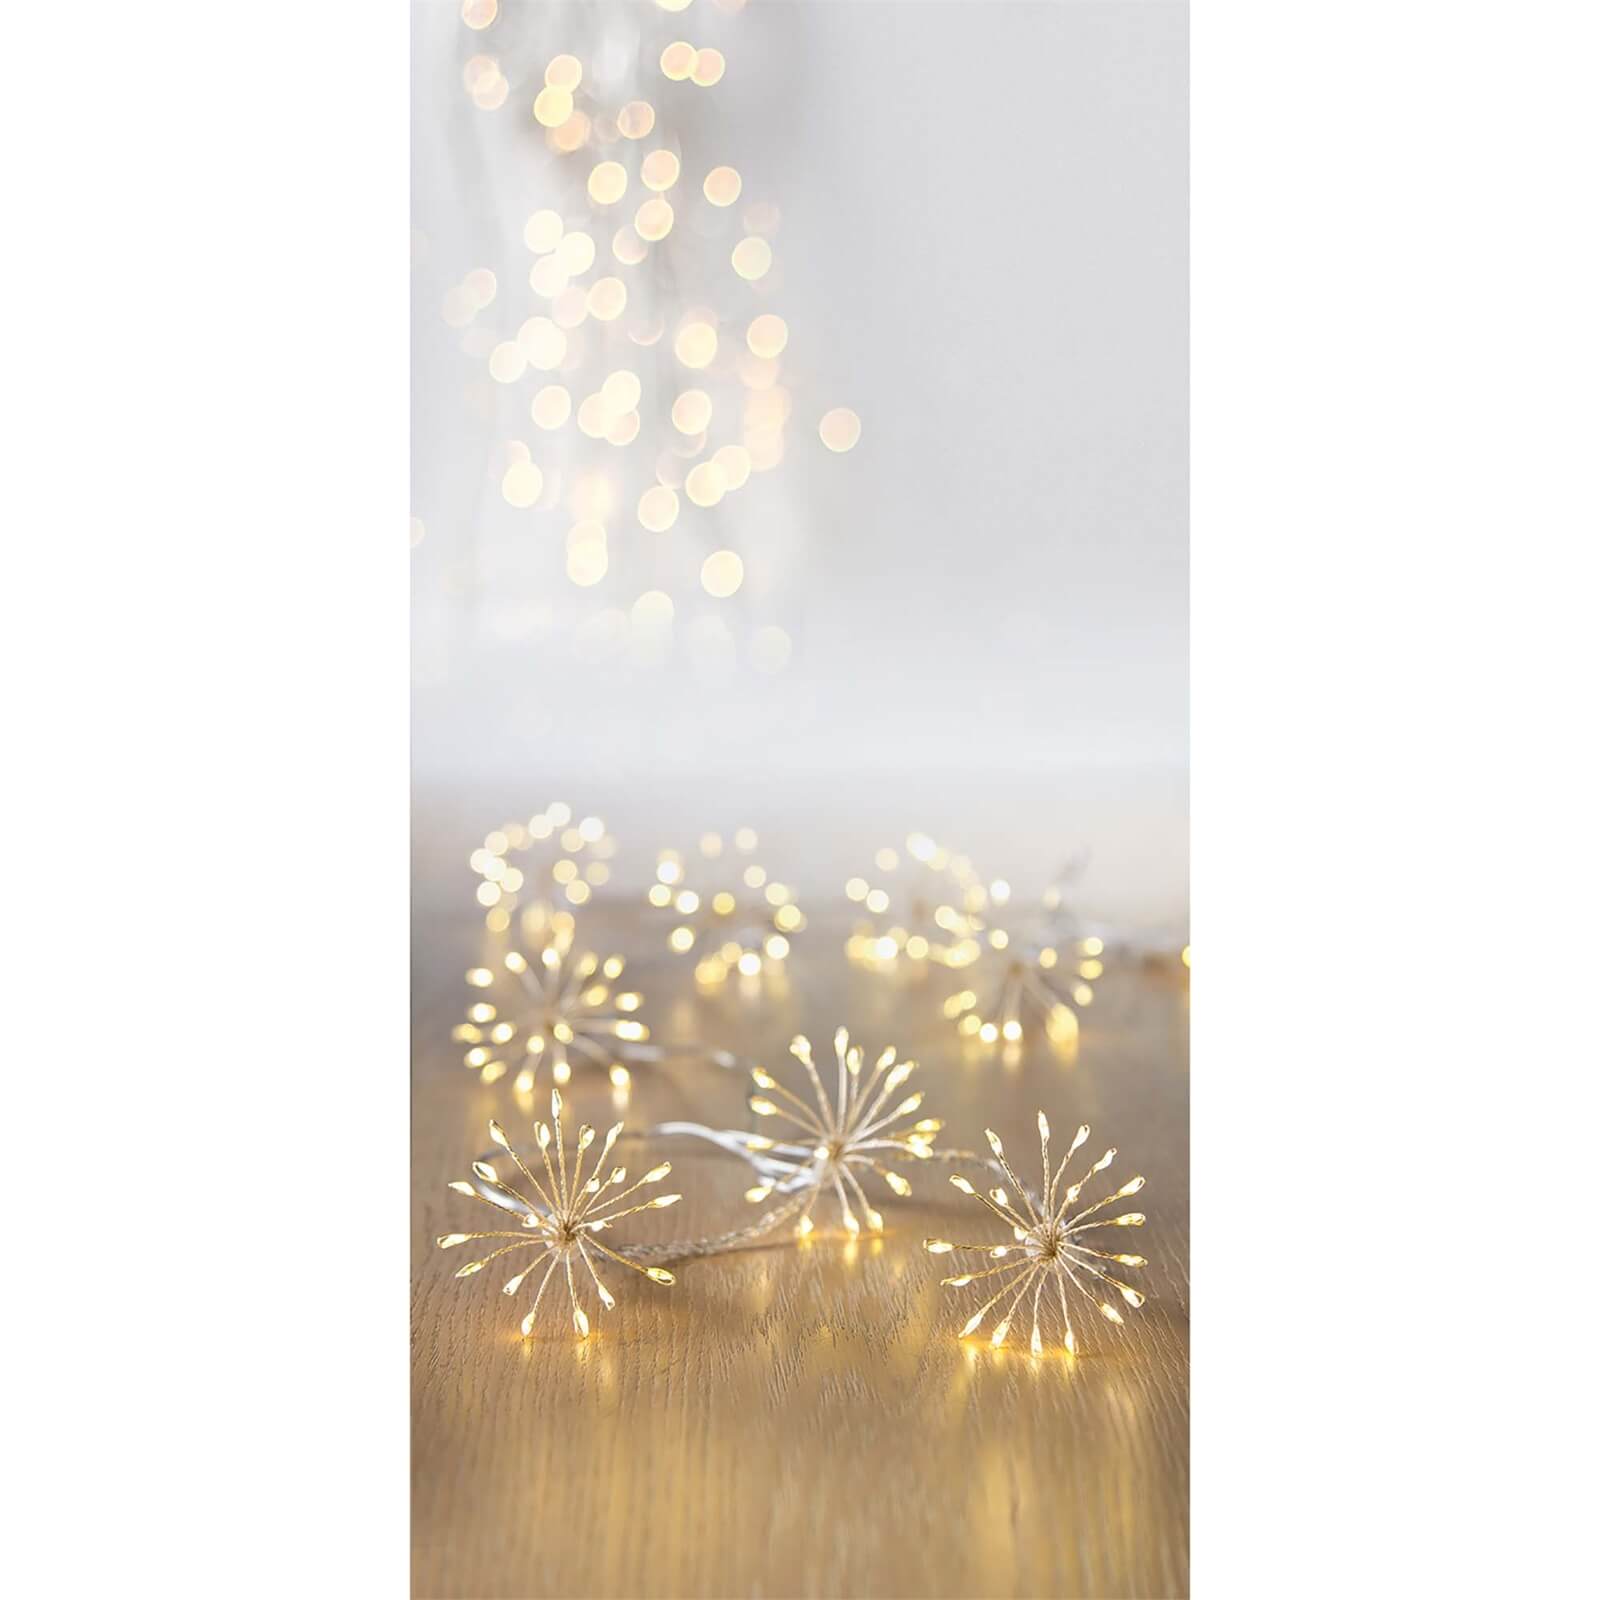 200 Battery Operated Multi-action String Light in Warm White LED's